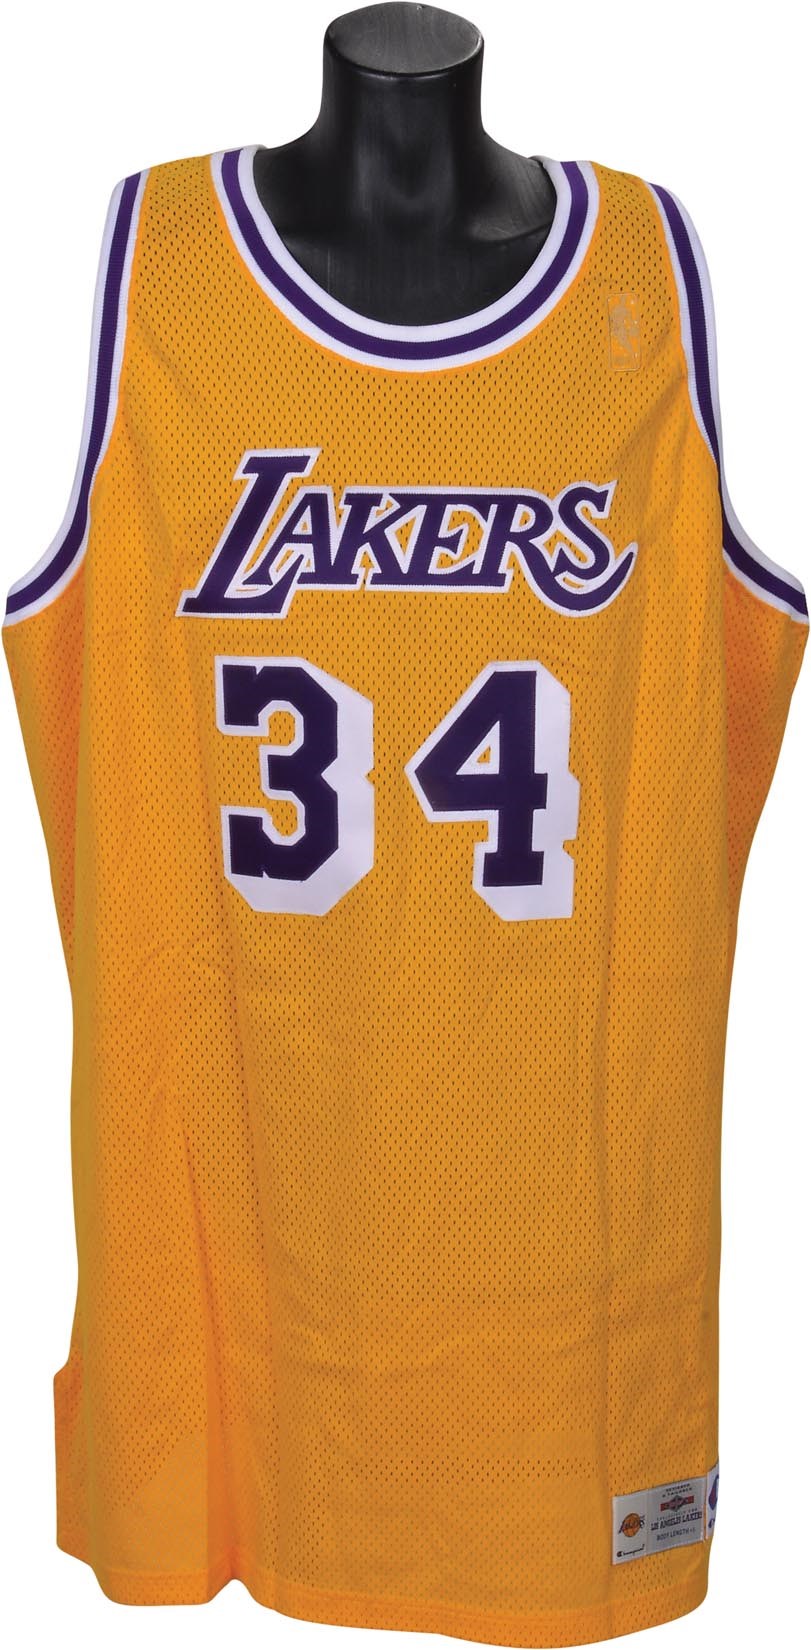 - 1996-97 Shaquille O'Neal Game Issued Lakers Jersey